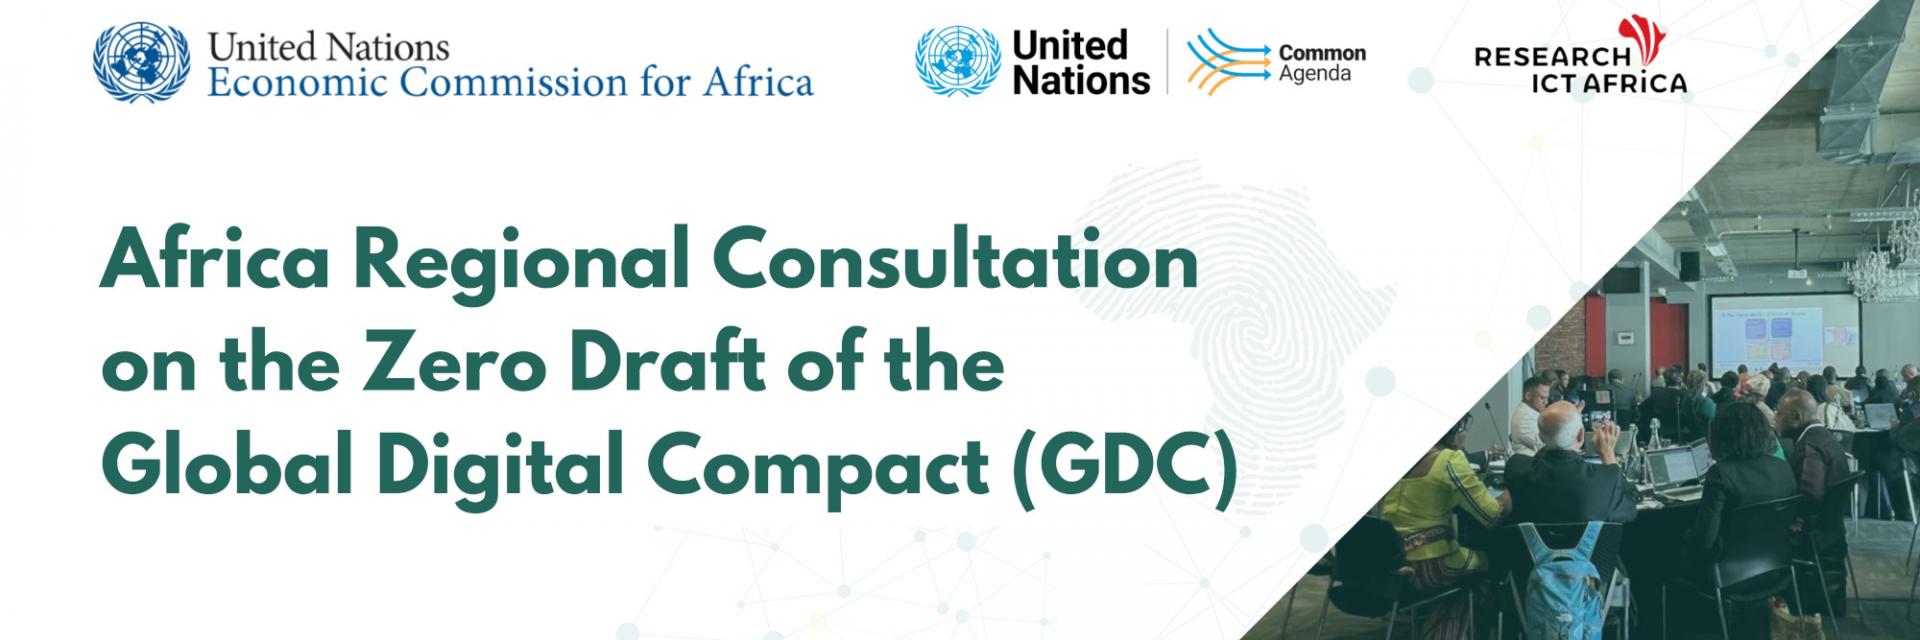 ECA and Research ICT Africa (RIA) hosted Regional Open Consultation on Africa’s Zero-Draft Policy declaration for the Global Digital compact (GDC)